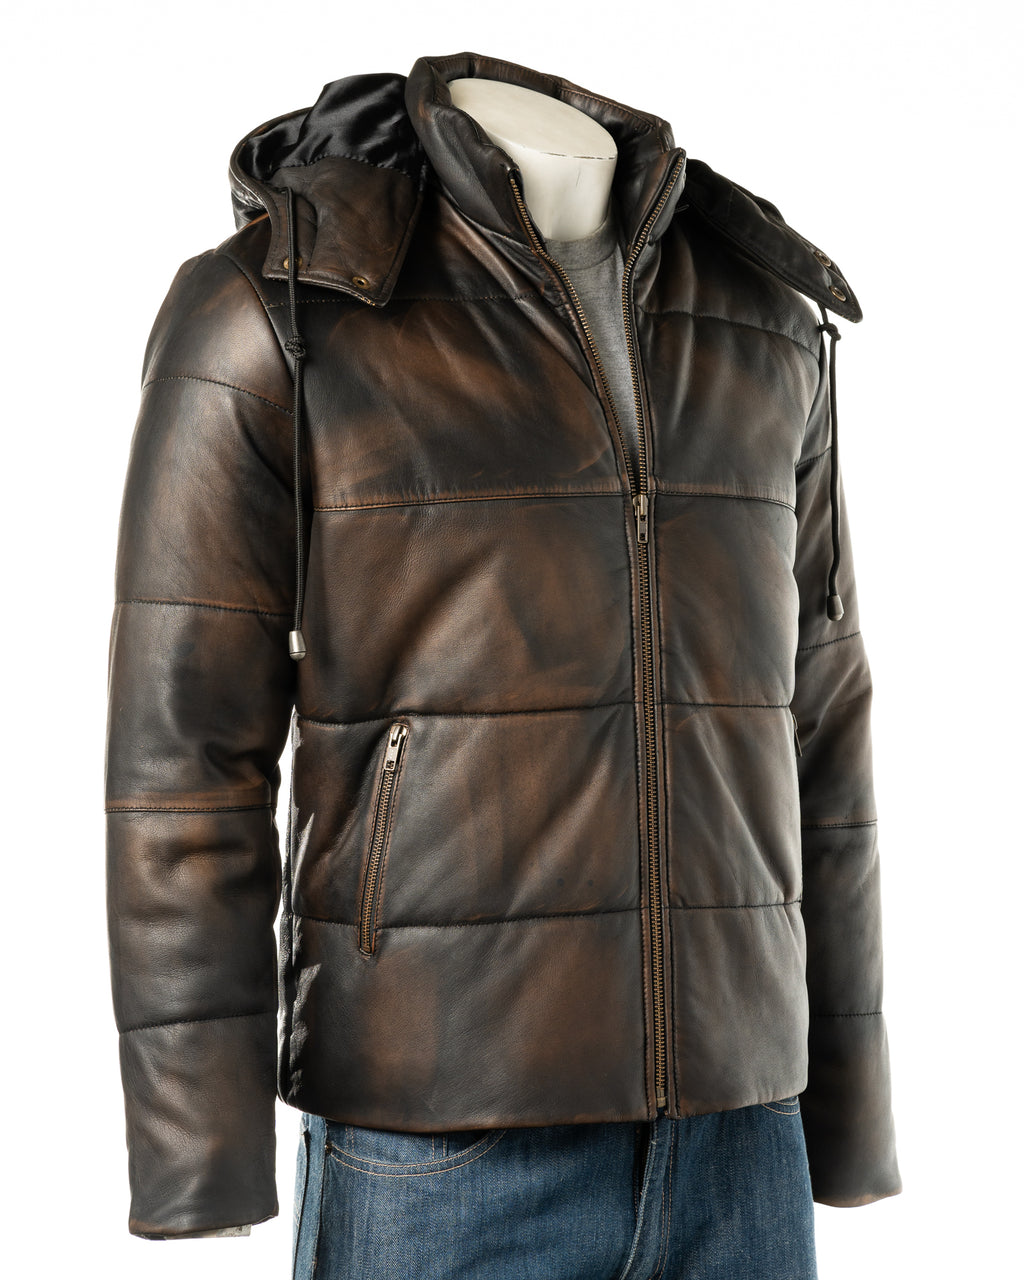 Men's Antique Black Leather Puffer Jacket With Detachable Hood: Dino